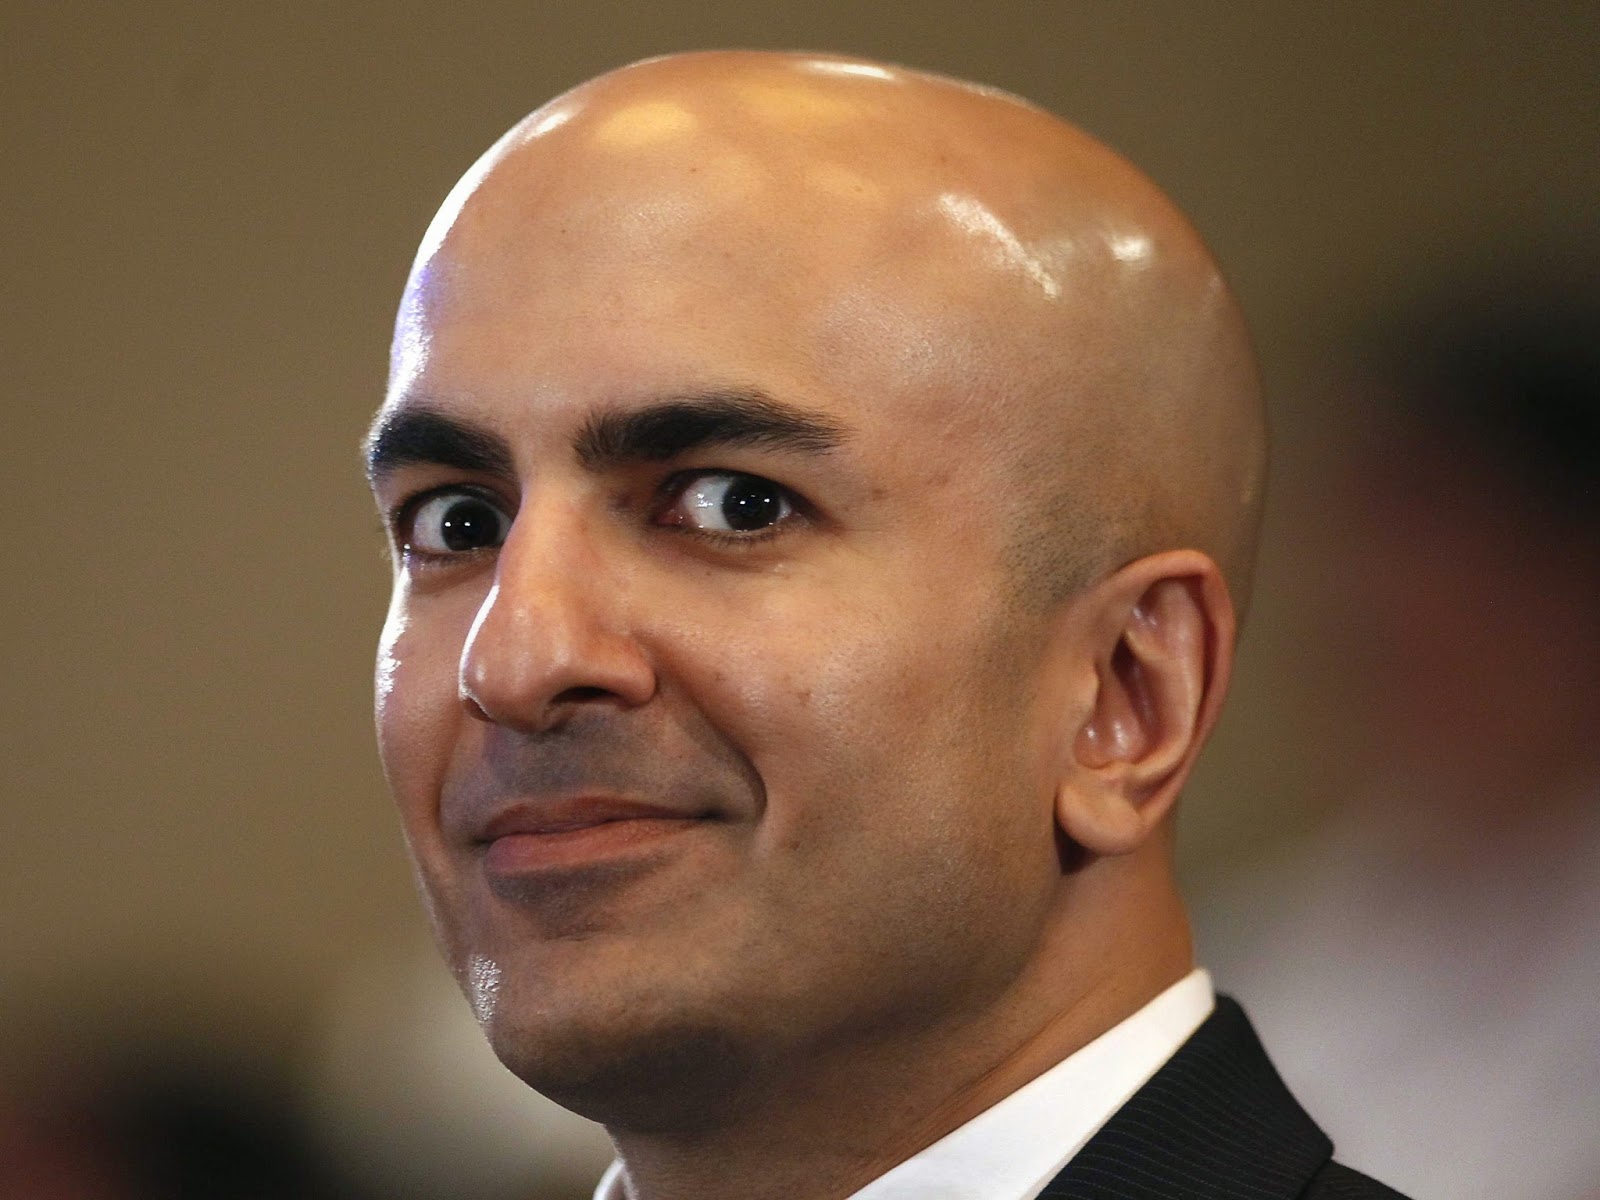 former-bank-bailout-chief-neel-kashkari-wants-to-be-the-next-governor-of-california.jpg